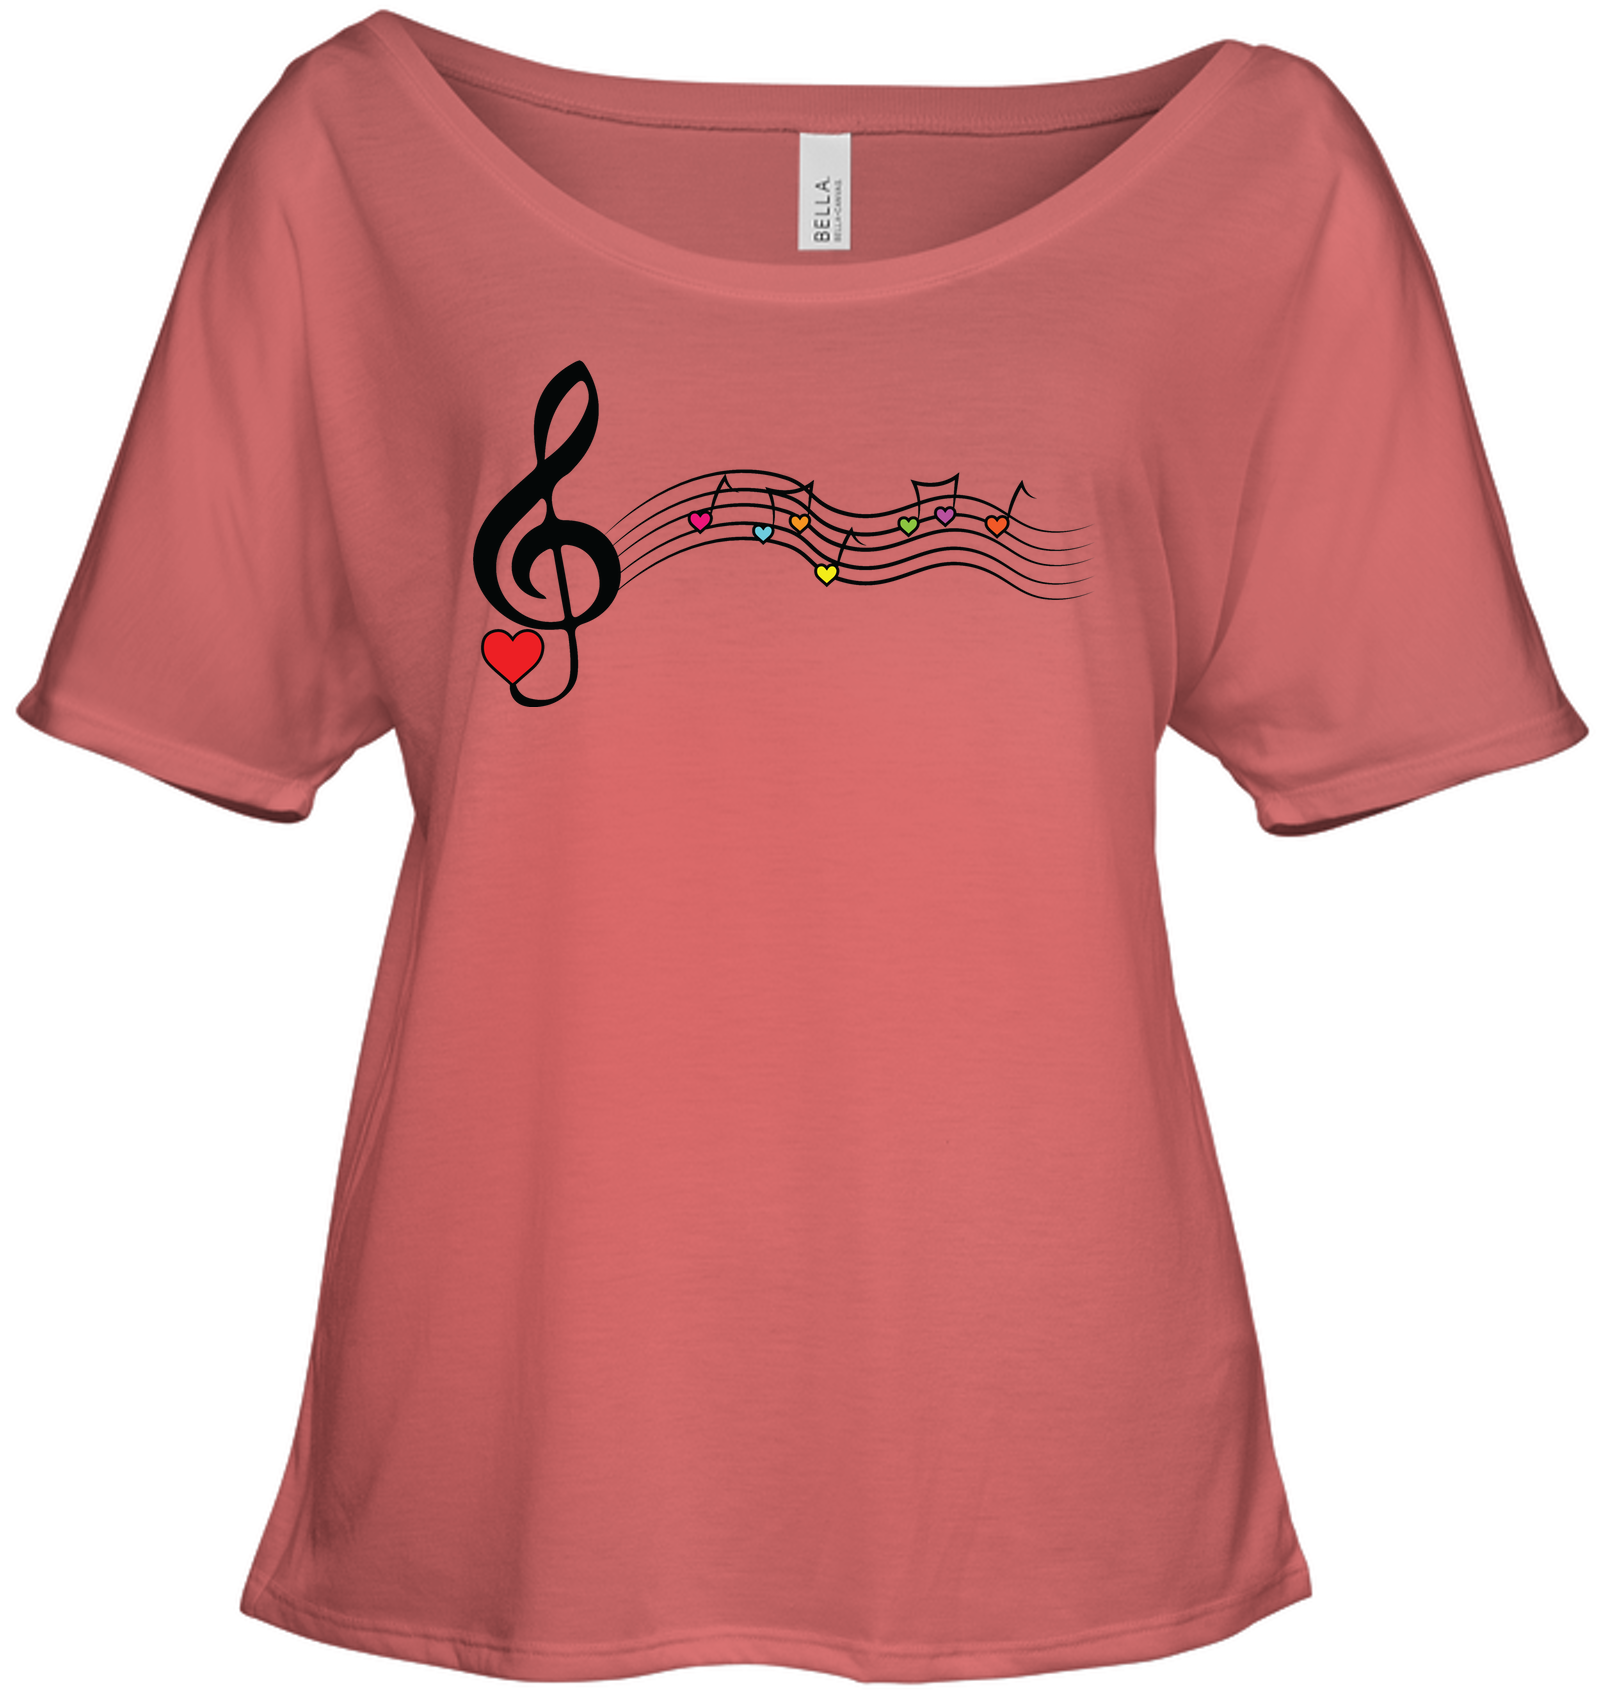 Musical Waves, Heart Notes and Colors - Bella + Canvas Women's Slouchy Tee